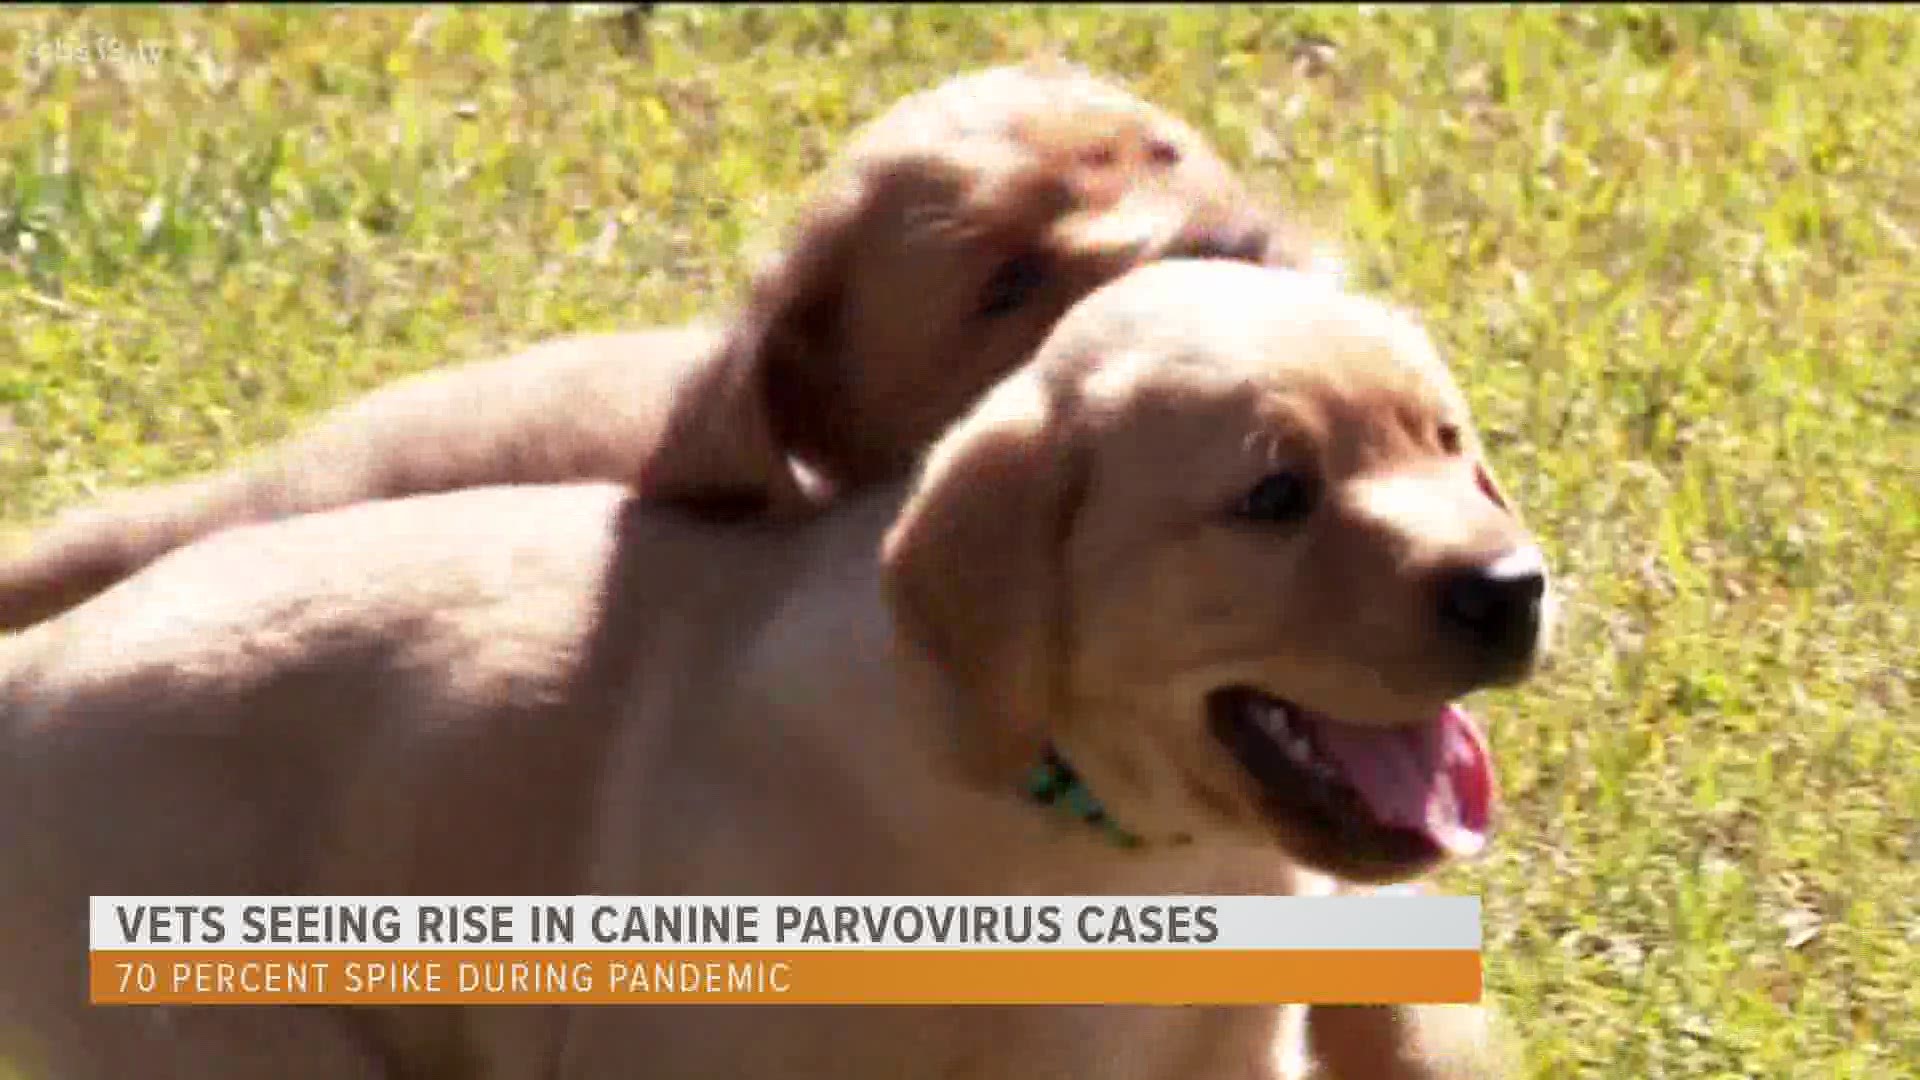 As the nation battles the coronavirus, Dr. Shirey warns of another virus on the rise in dogs.